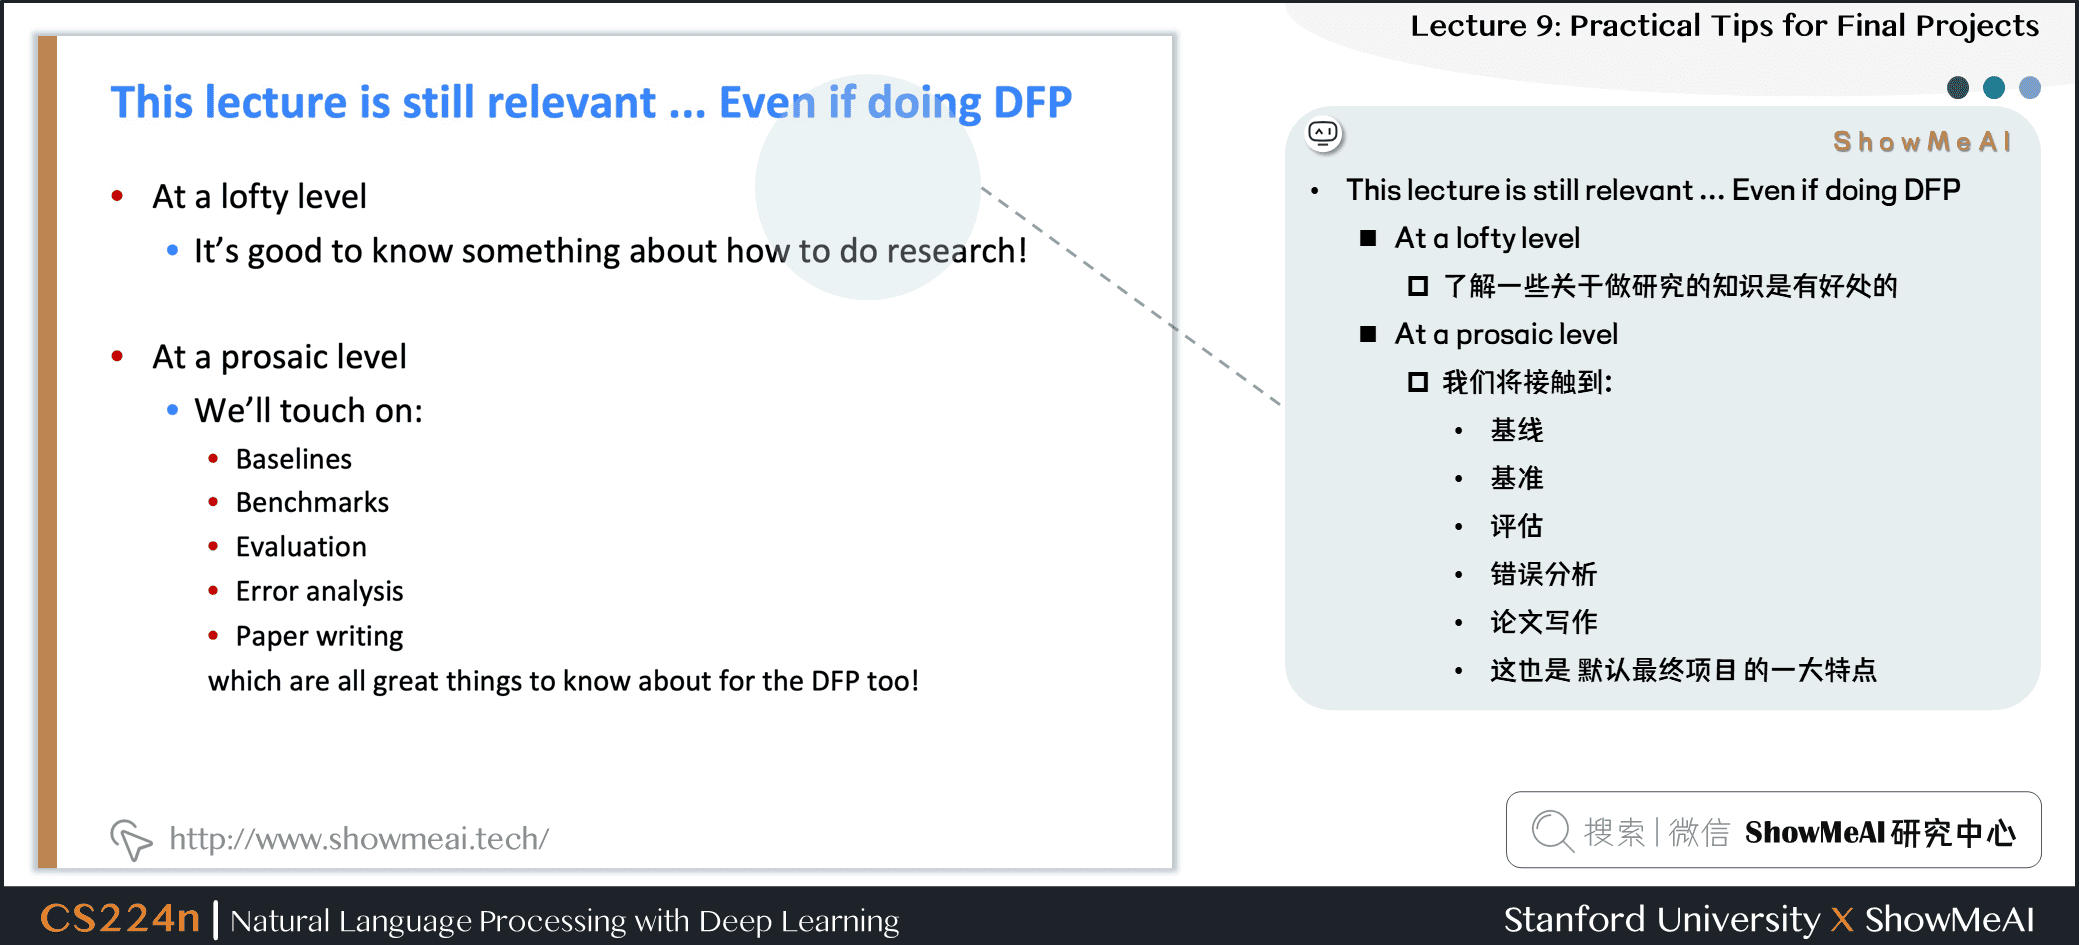 This lecture is still relevant ... Even if doing DFP